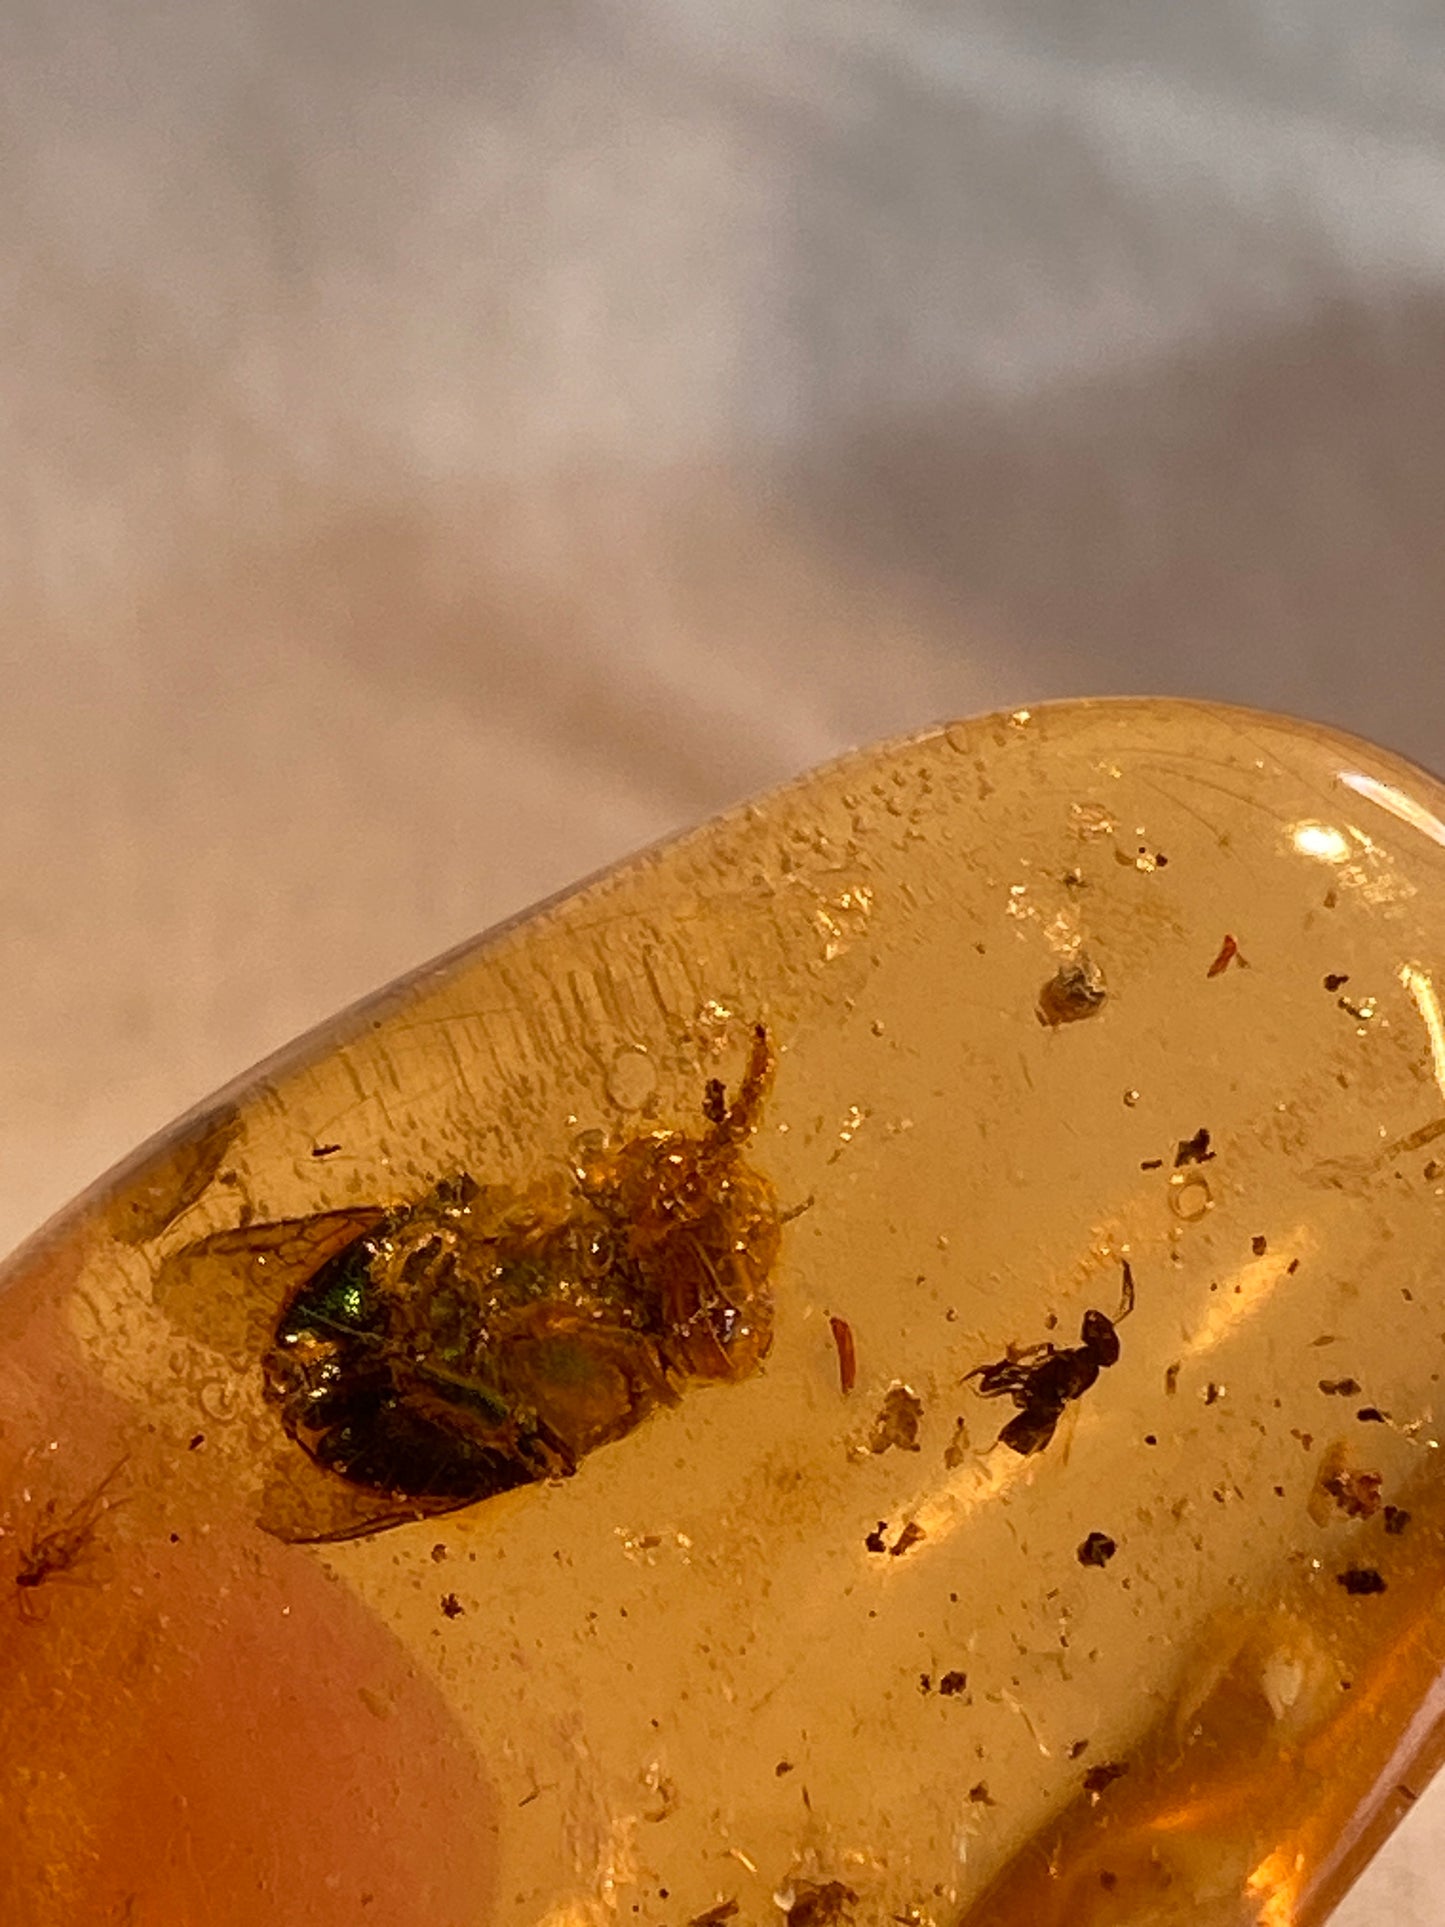 Copal with insects, Santander, Columbia